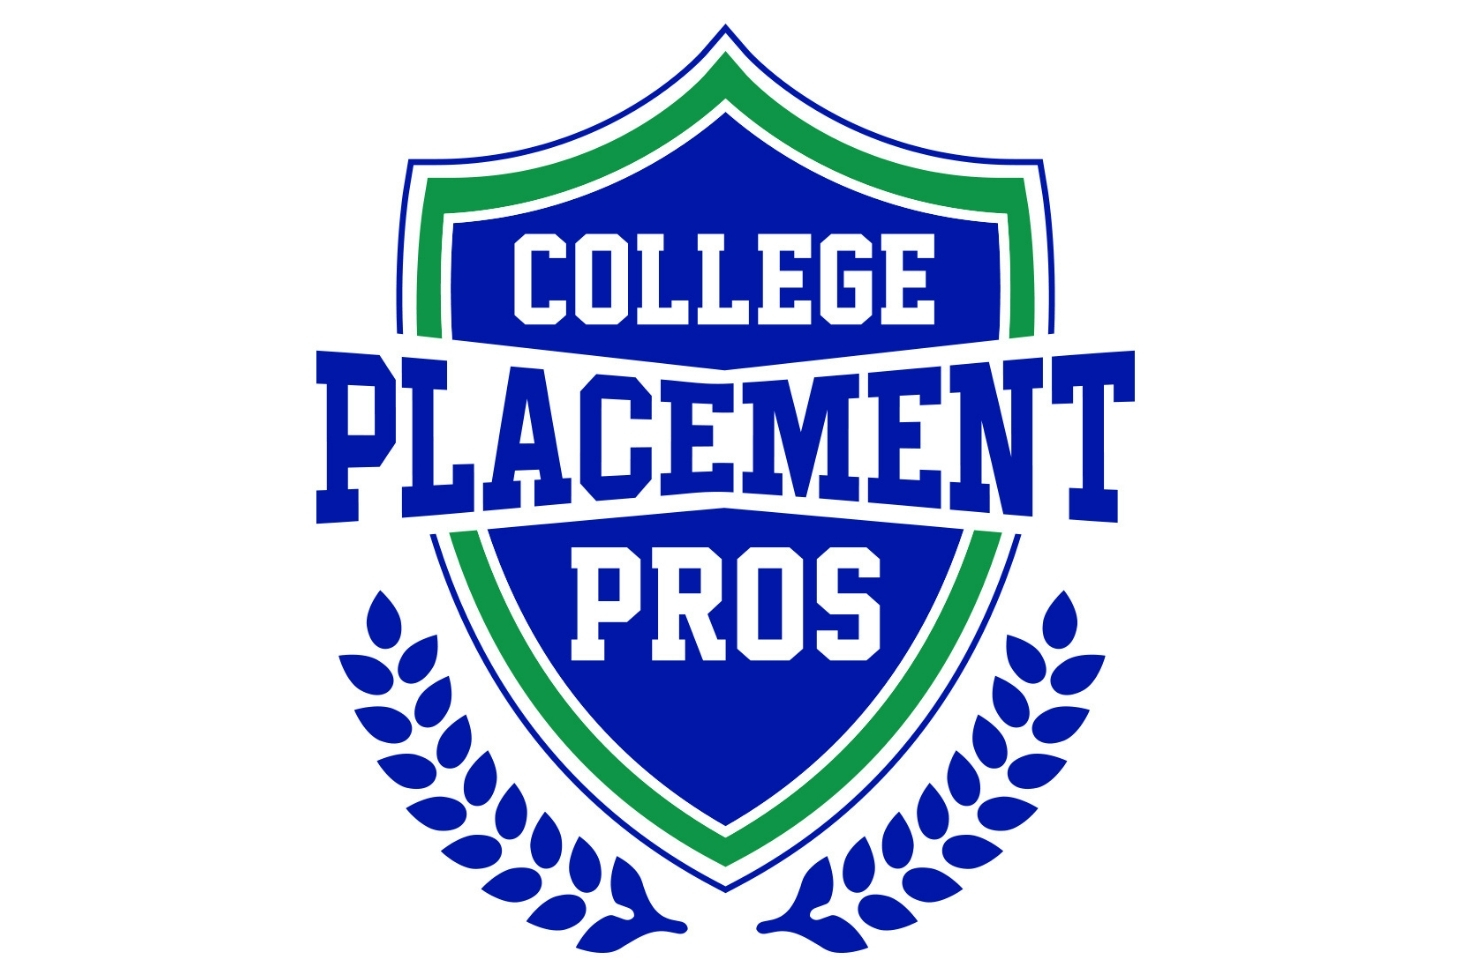 College Placement Pros logo in a blue and green shield